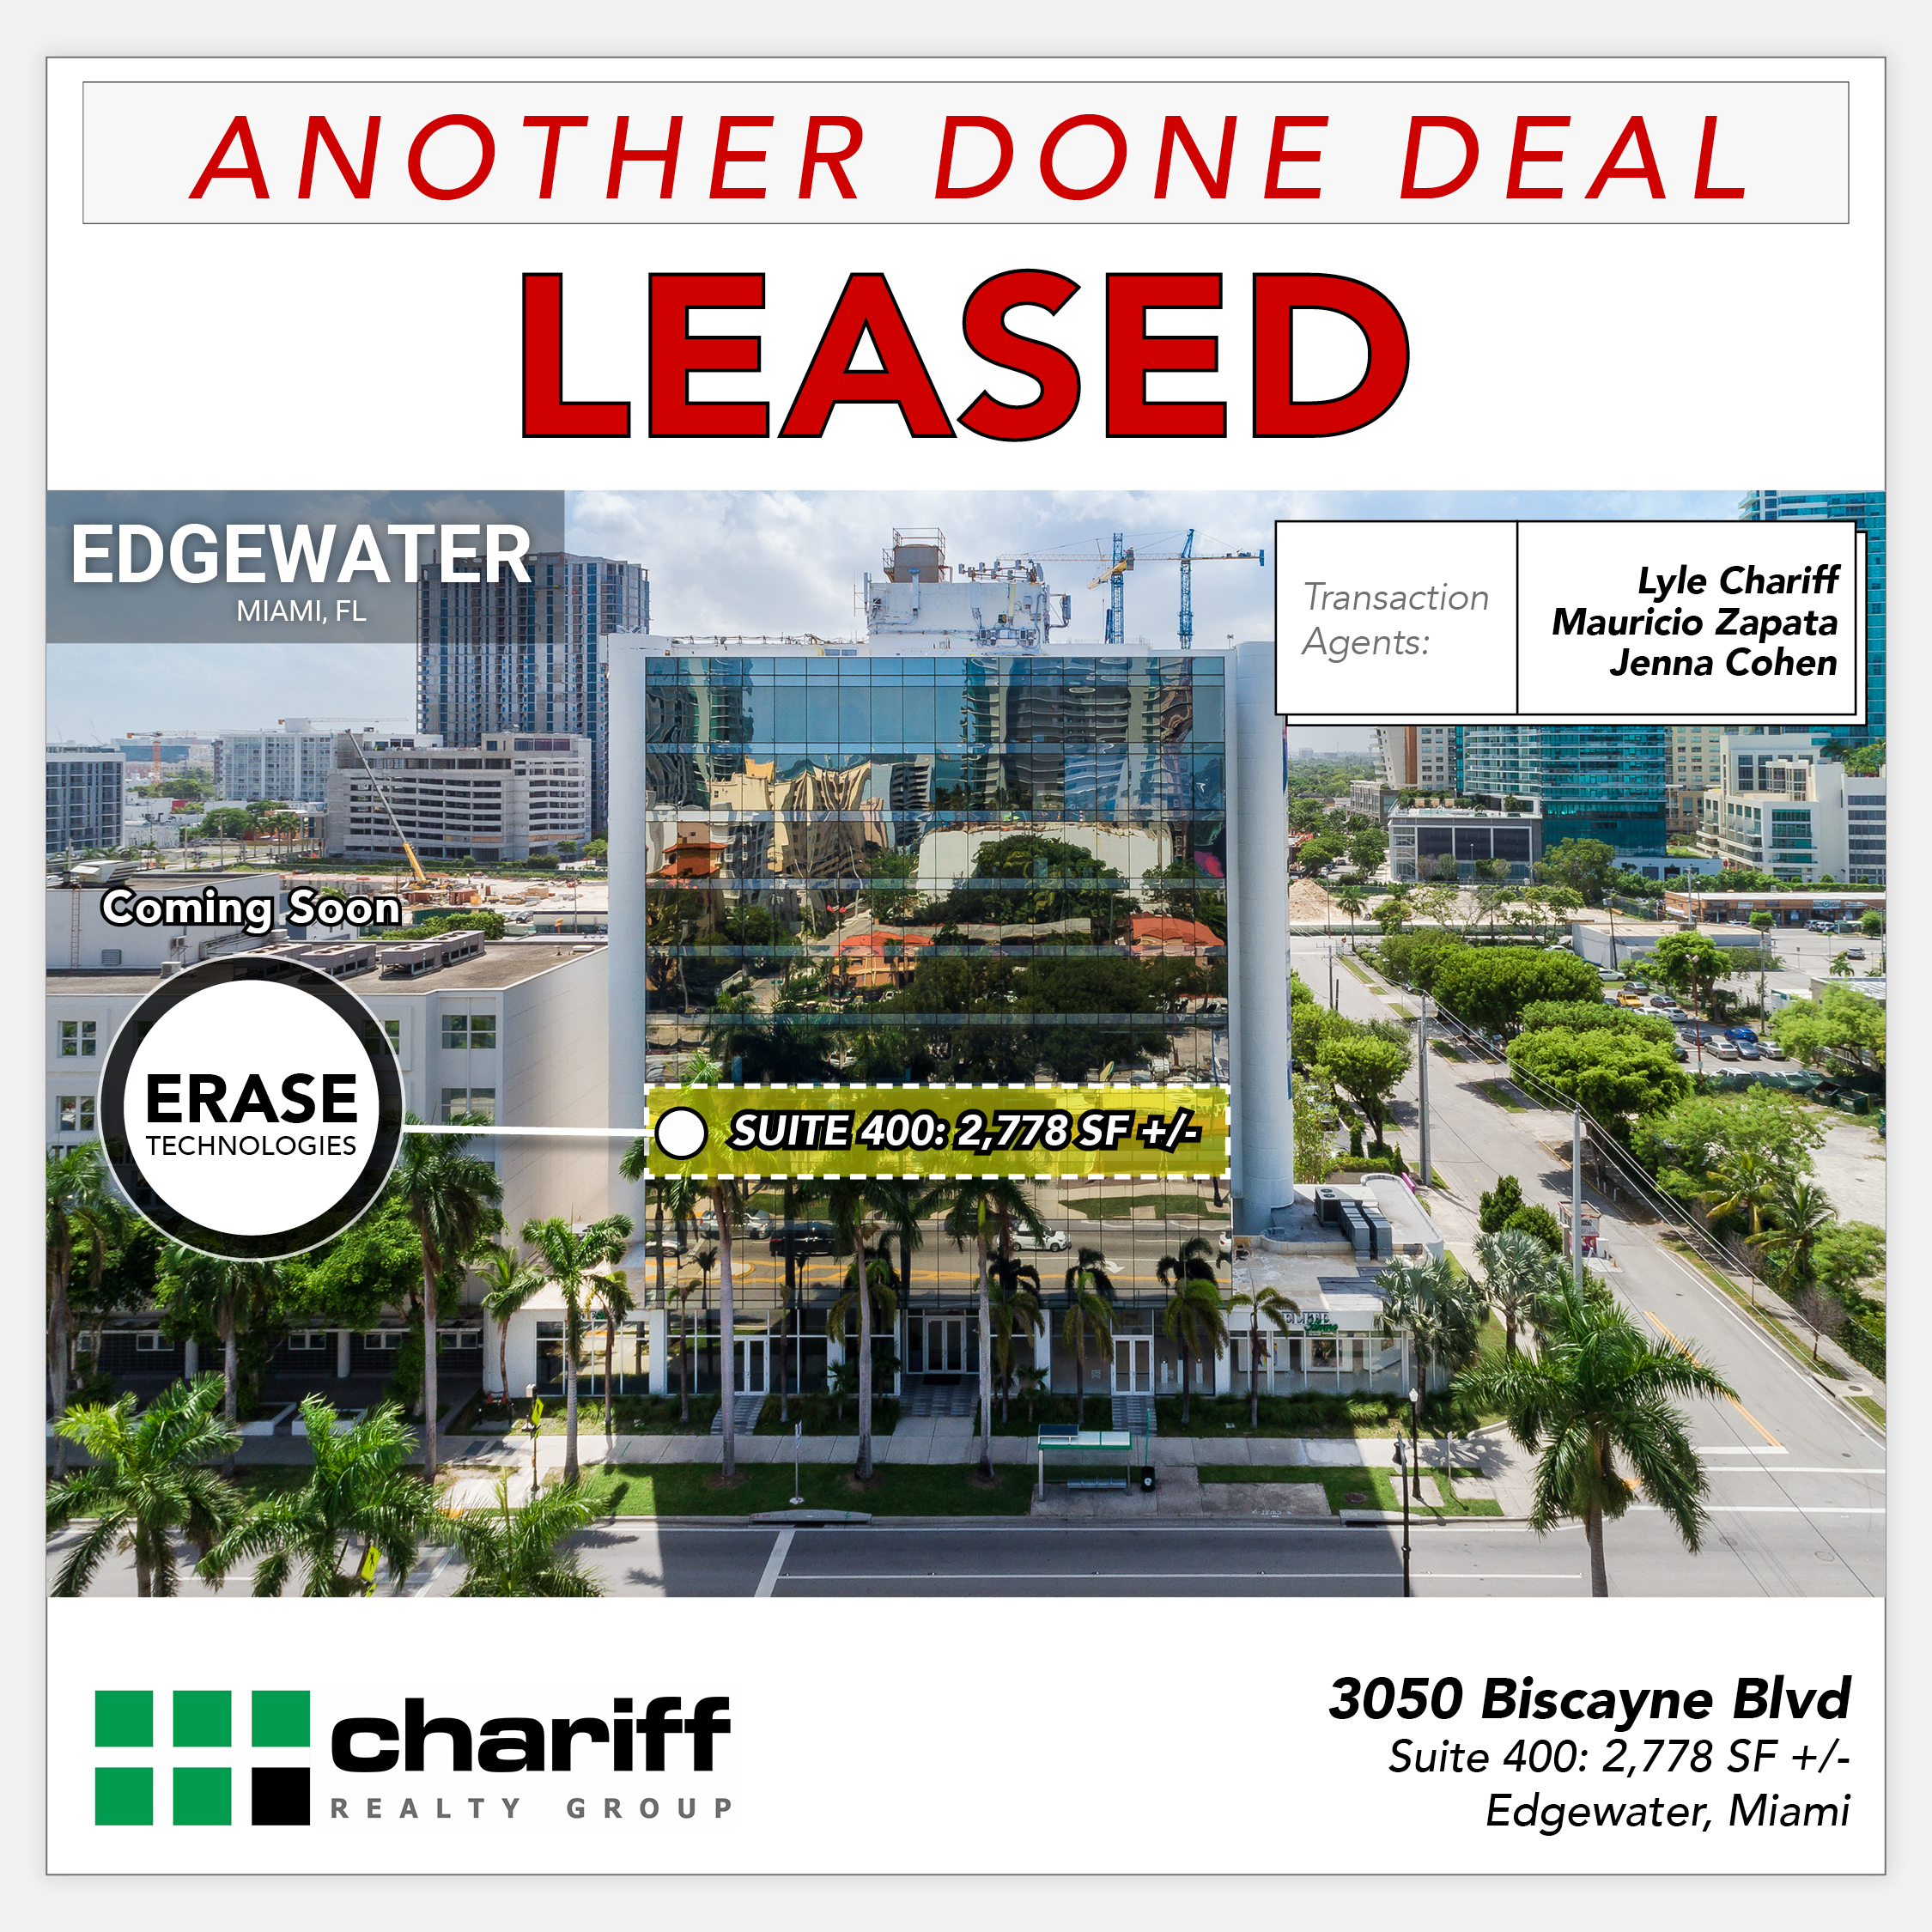 Another Done Deal - Leased: 3050 Biscayne Blvd - suite 400 - Edgewater, Miami, FL-Commercial Real Estate